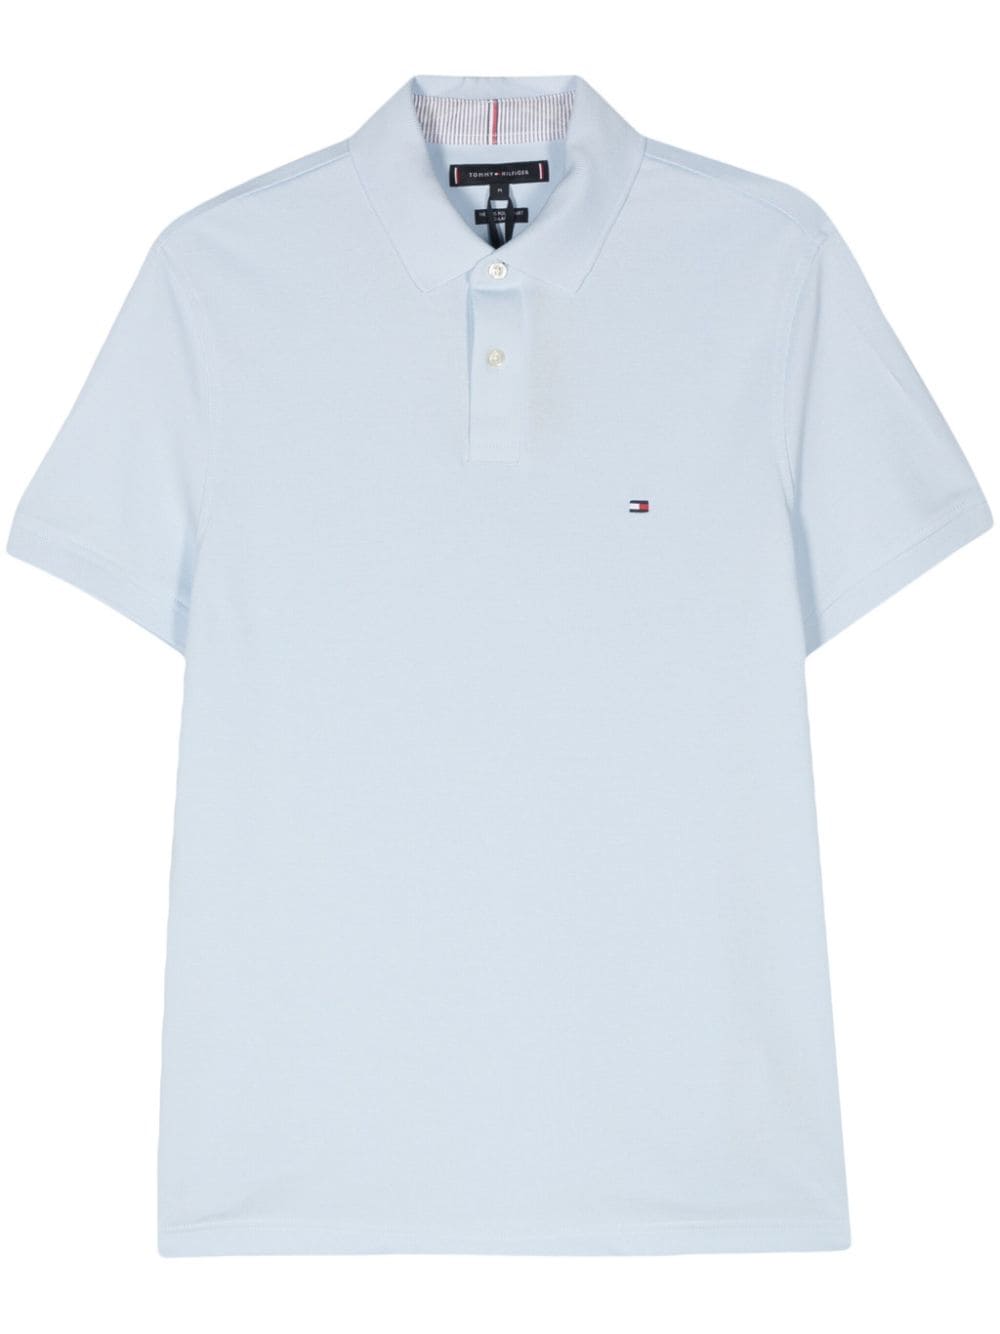 Tommy Hilfiger 19865 Collection cotton polo shirt - Blu